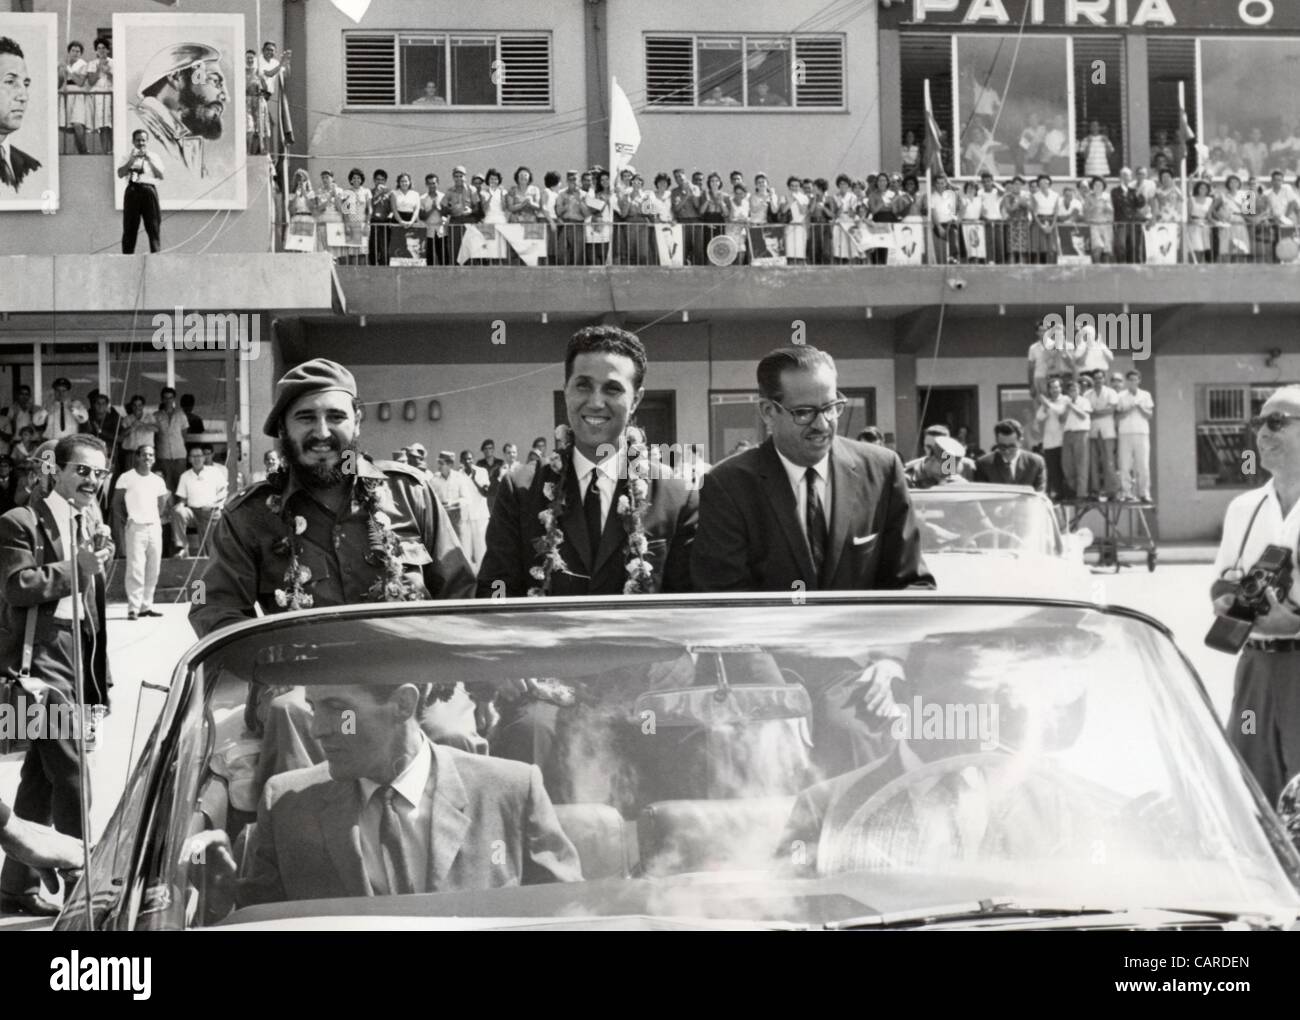 Oct. 23, 1962 - Havana, Cuba - Cuban revolutionary leader who led his country from January 1959 until his retirement in February 2008, FIDEL CASTRO transformed Cuba into the first communist state in the Western Hemisphere. PICTURED: Algerian president AHMED BEN BELLA (center) while visiting Cuba, ne Stock Photo